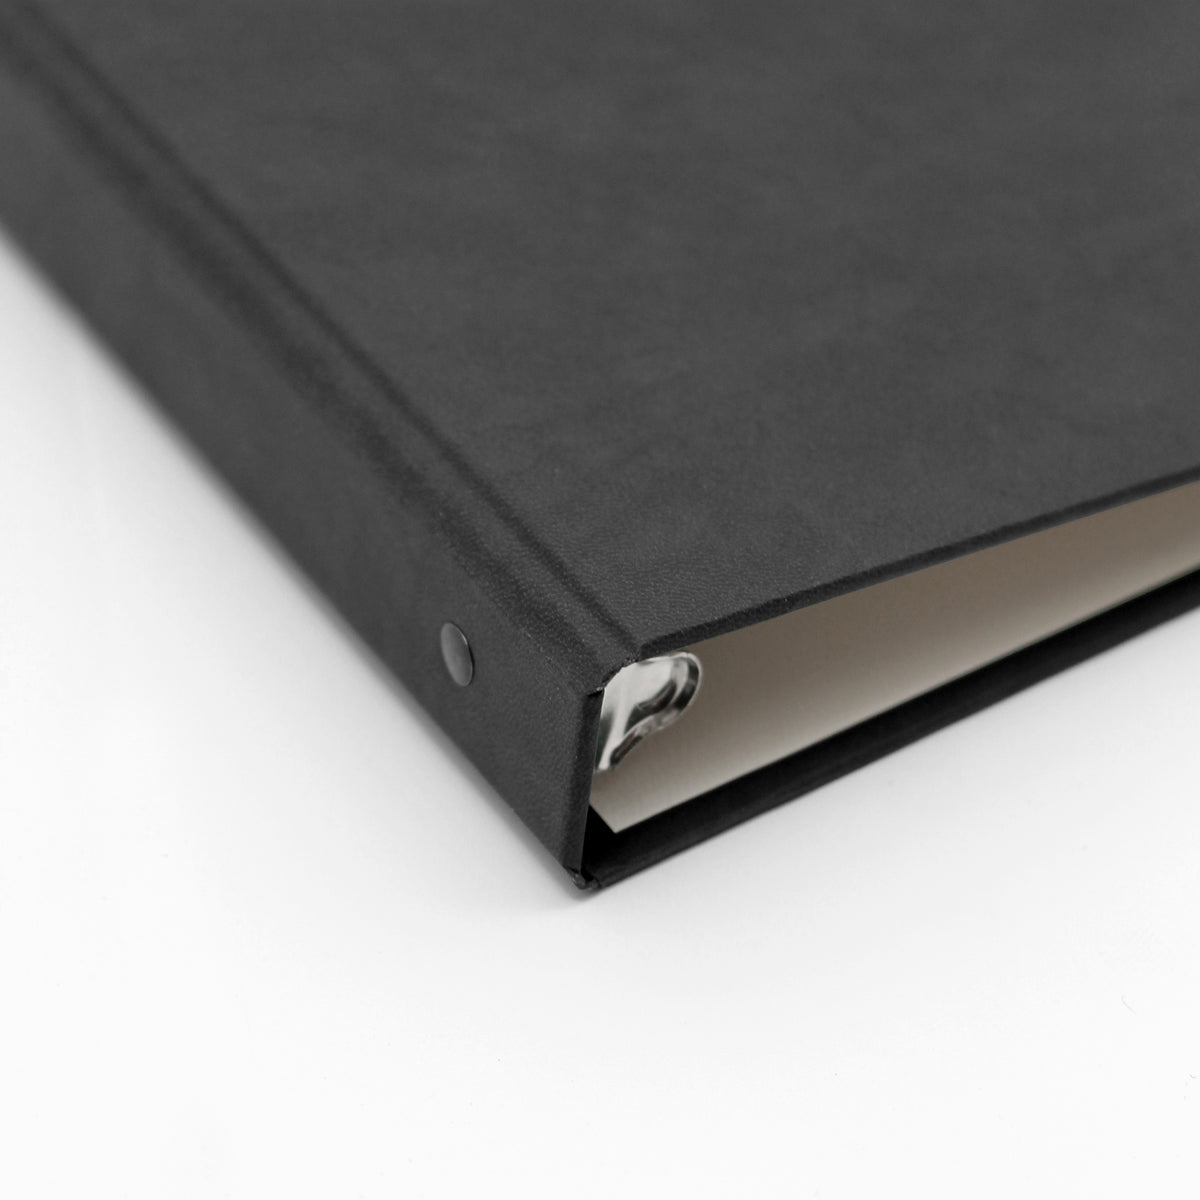 Officiant Binder | Cover: Black Vegan Leather | Available Personalized